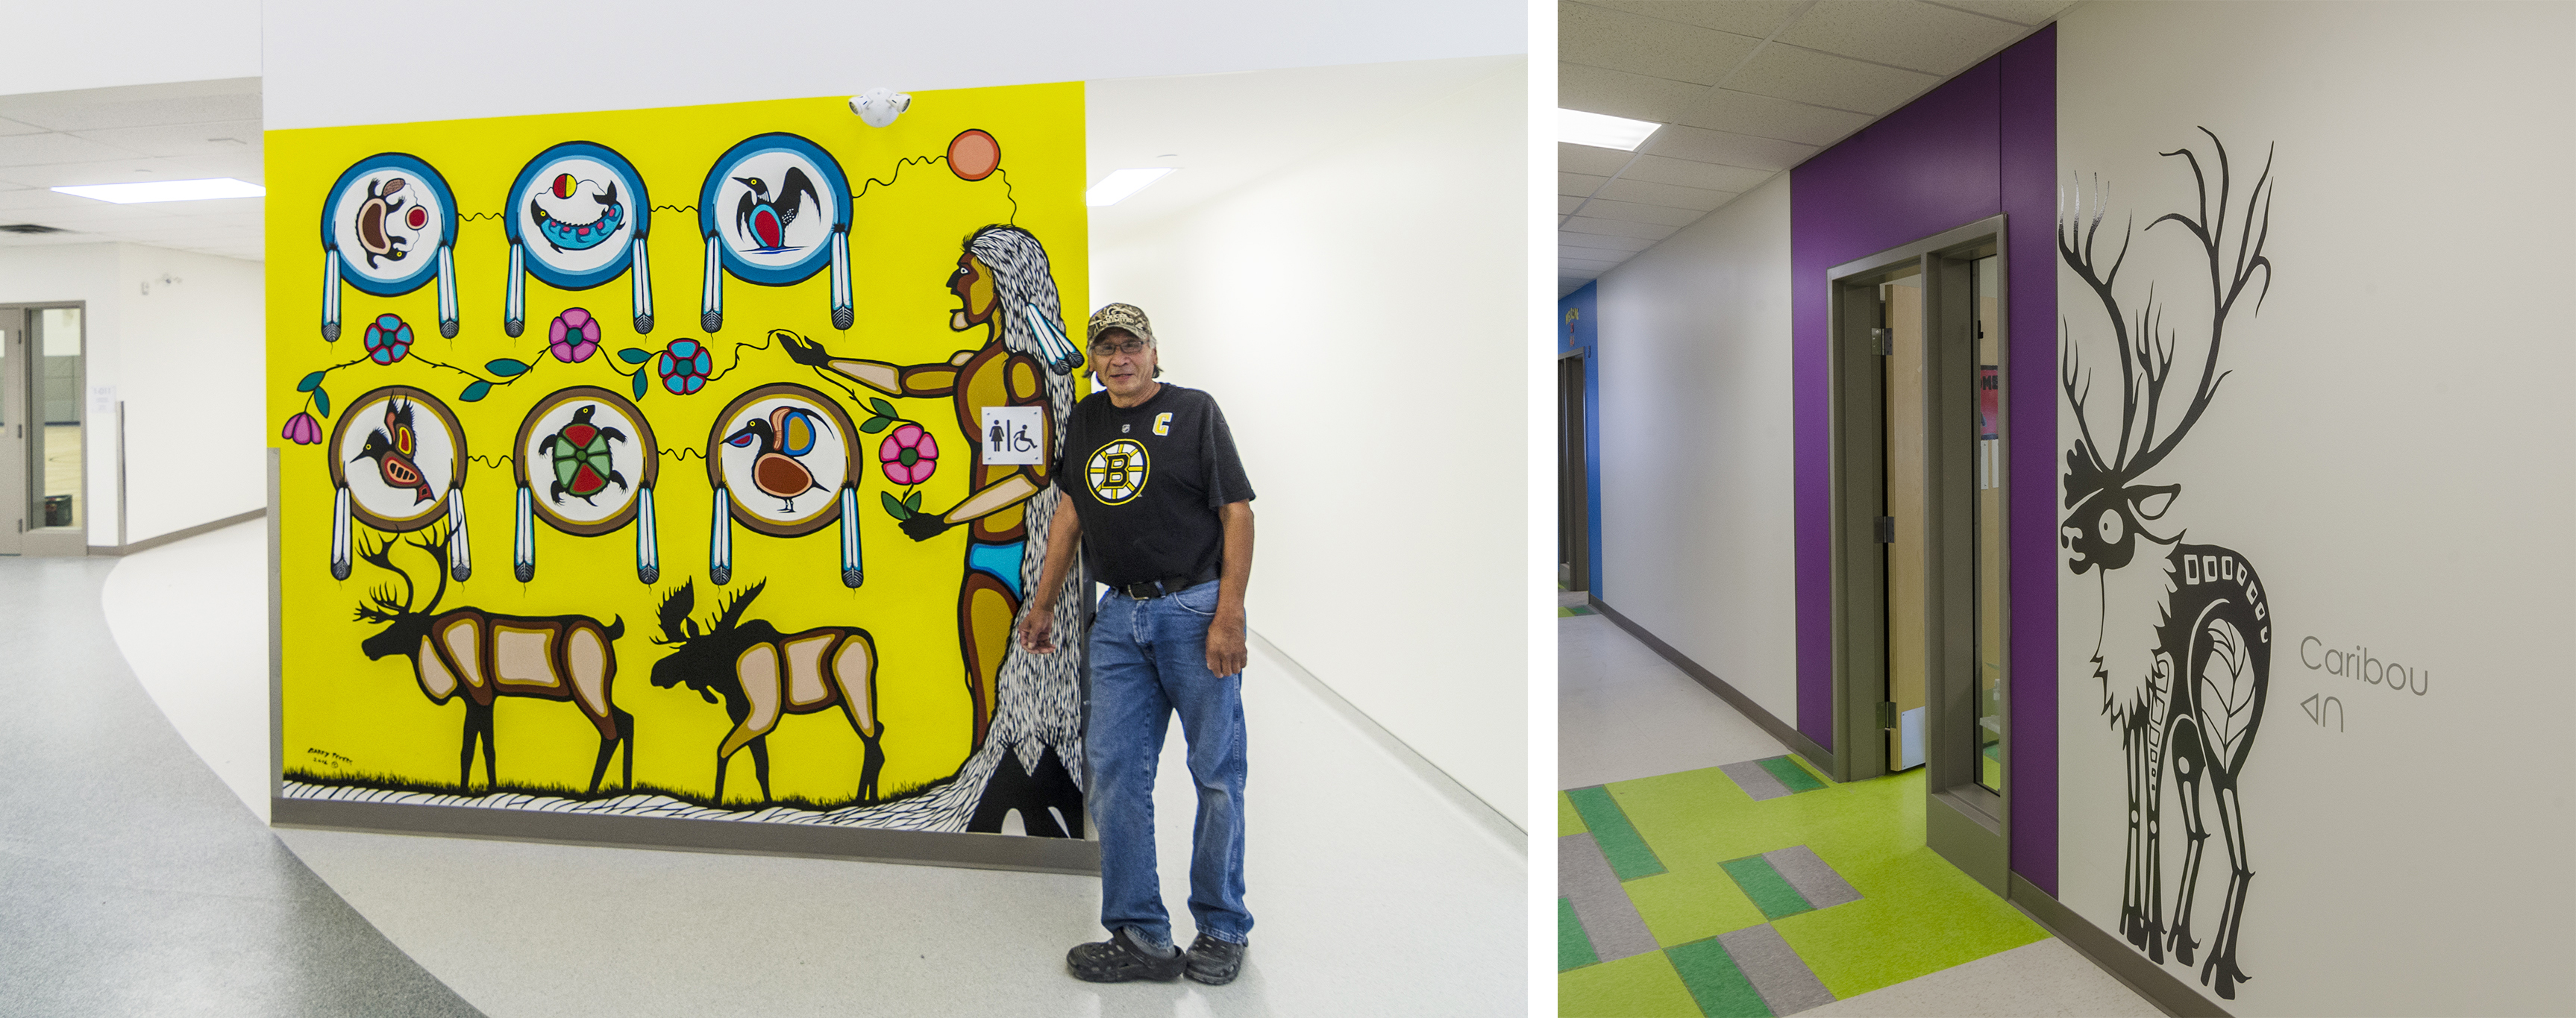 Left: Artist standing next to a colourful wall mural depicting a variety of Canadian fauna. Right: Doorway to a children's classroom with colourful floor tiles and a stylized wall graphic of a caribou.